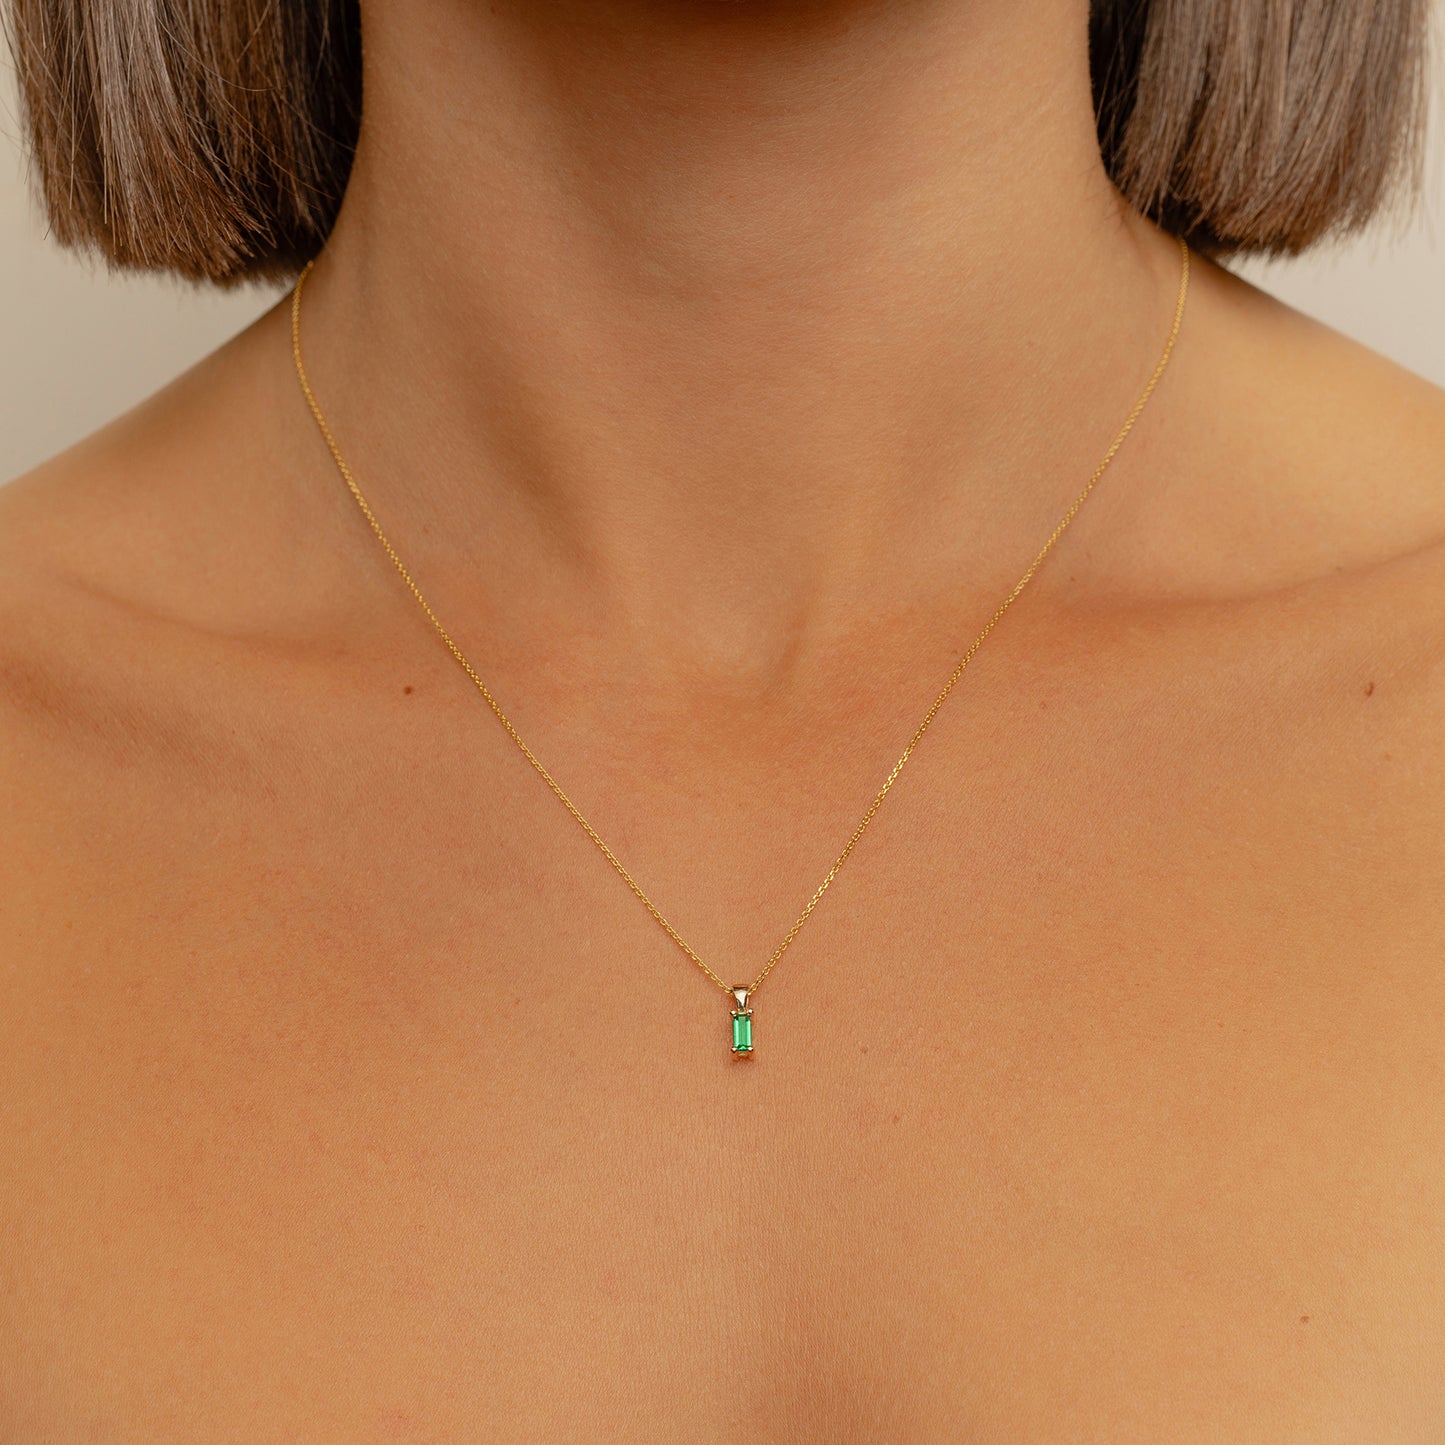 Paperclip necklace with Emerald Charm